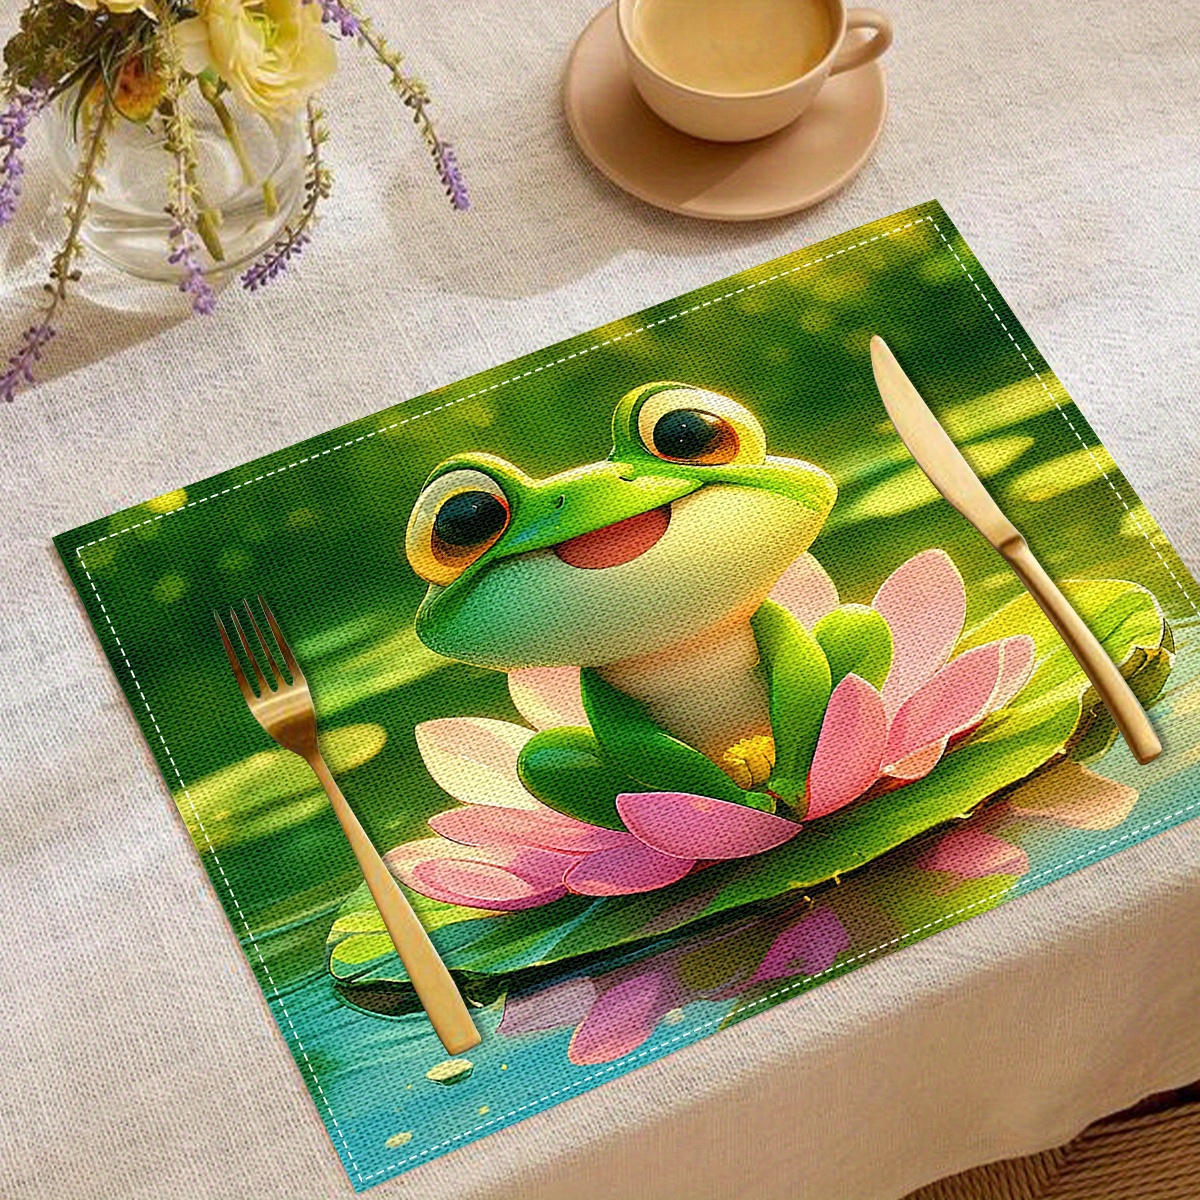 

4-piece Set Cute Cartoon Frog Linen Placemats - Oil & Stain Resistant, Square Table Mats For Dining & Decor